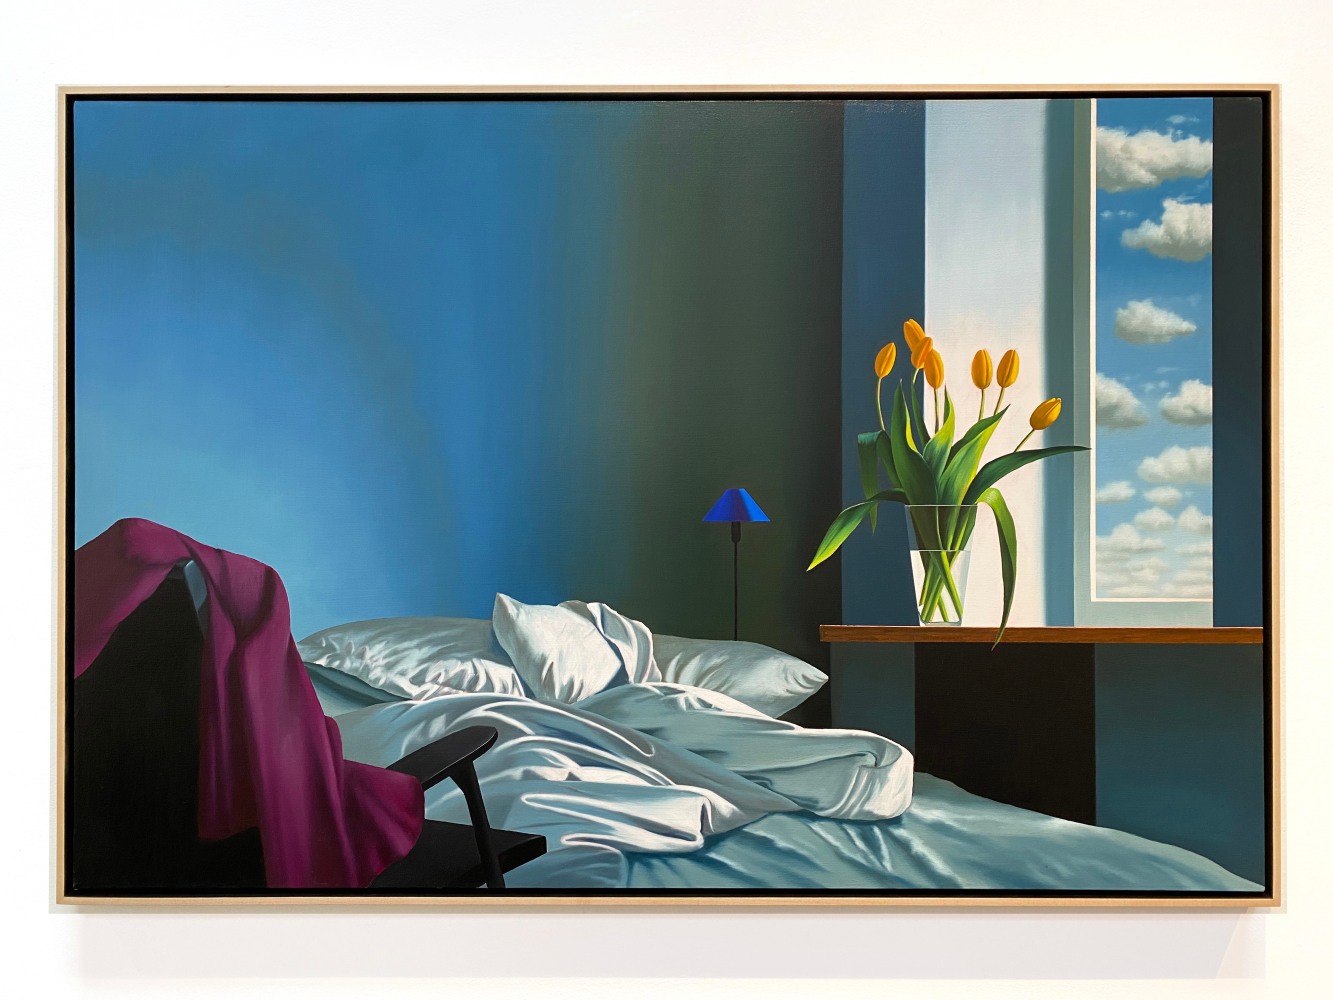 Interior with Unmade Bed, 2022
Oil on canvas
36 x 54 inches
COH098